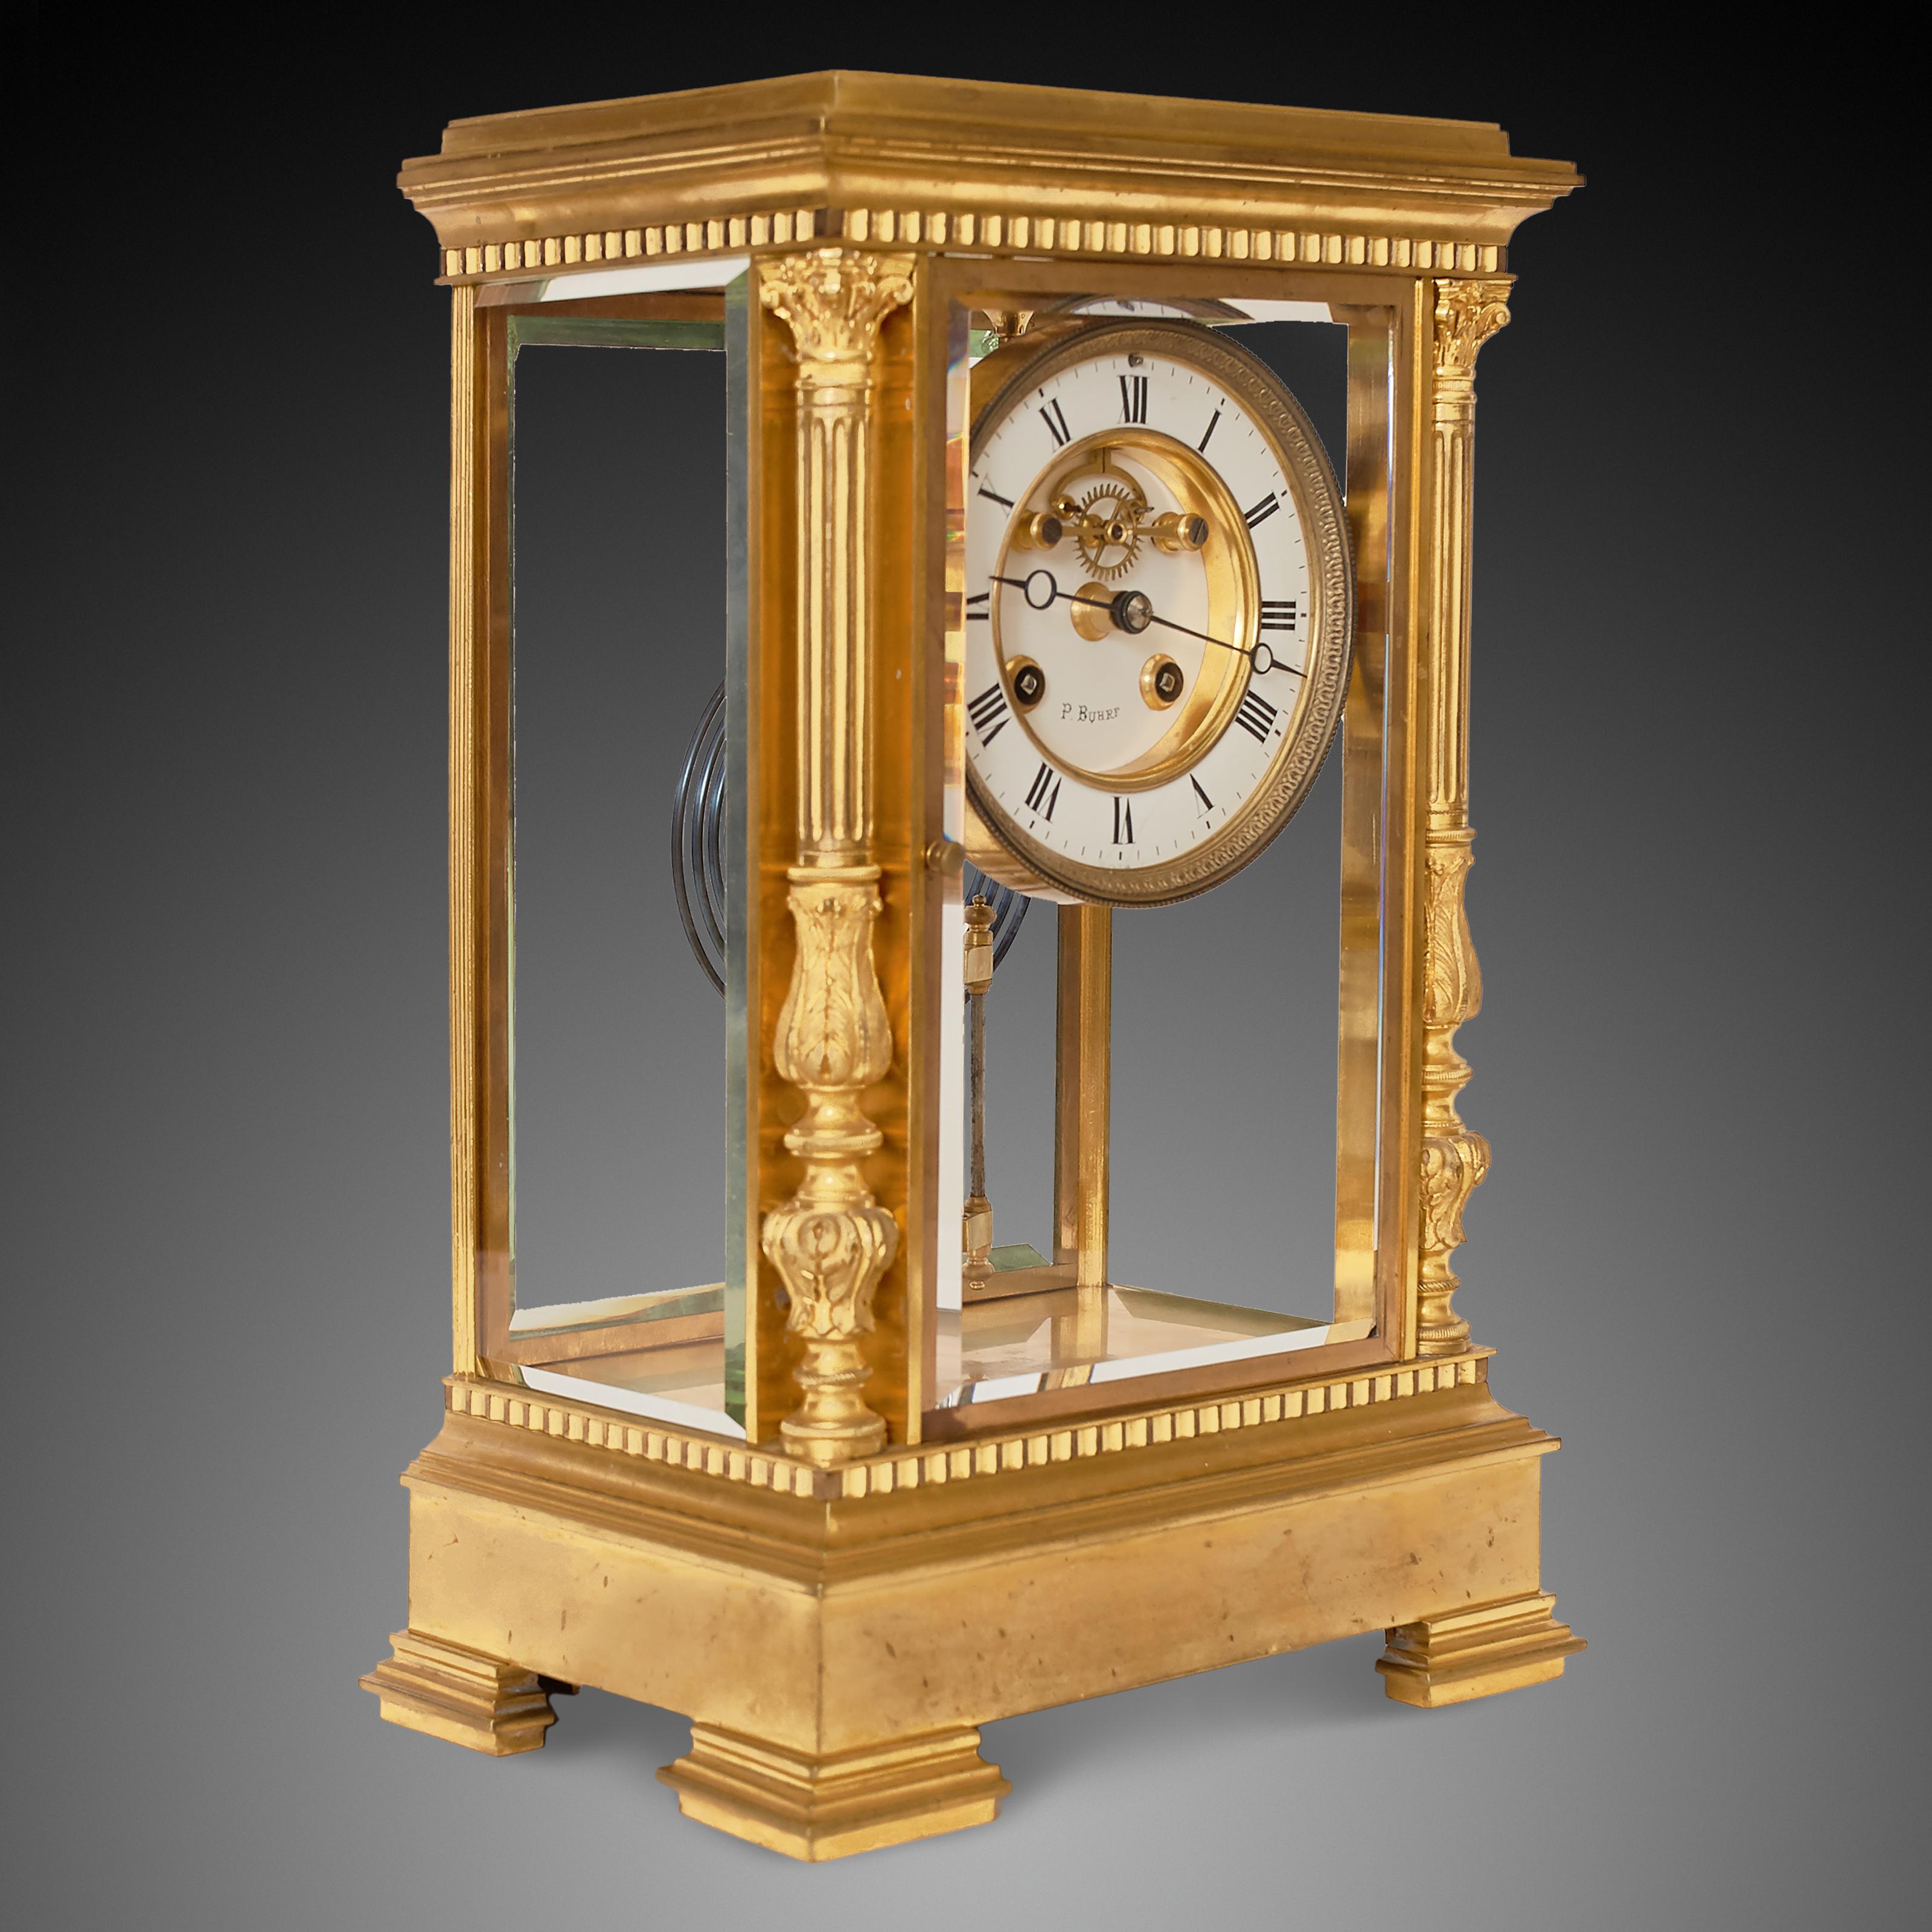 French Mantel Clock 19th Century Napoleon III Period by P.Buhrf